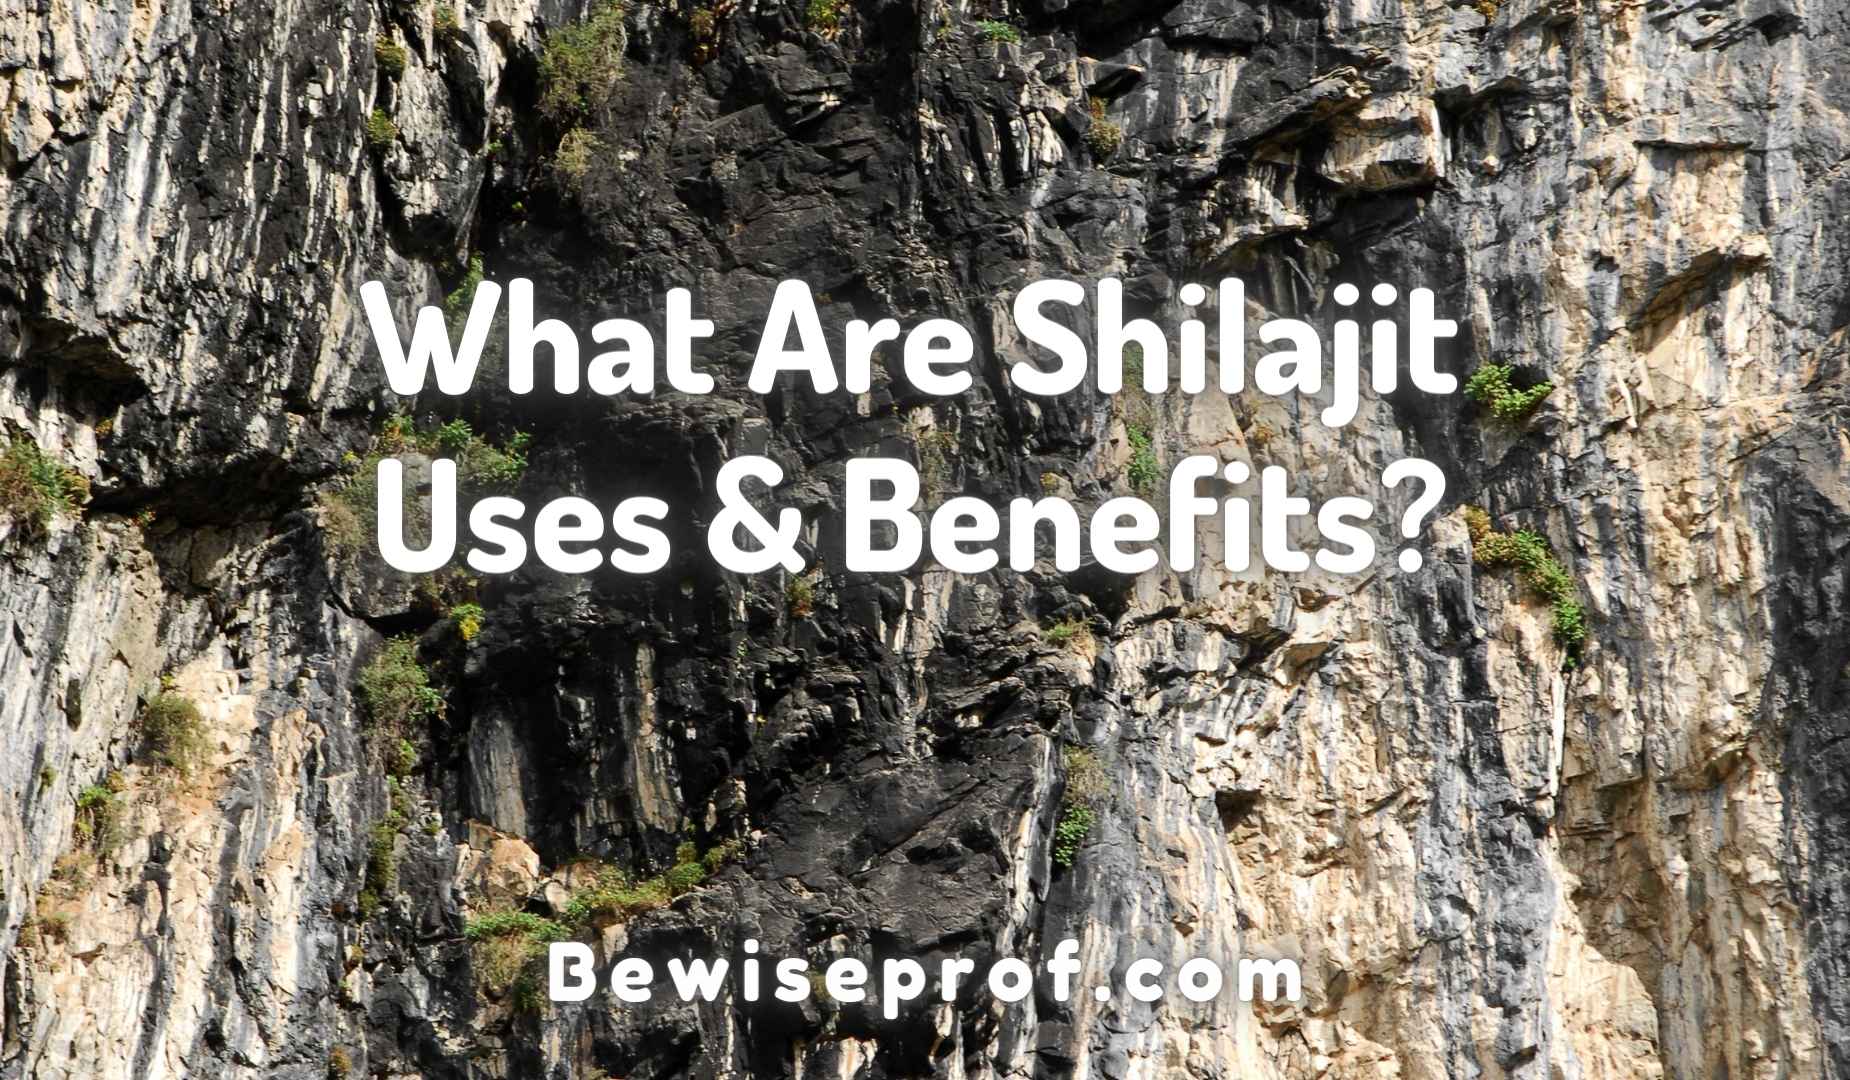 What Are Shilajit Uses & Benefits?